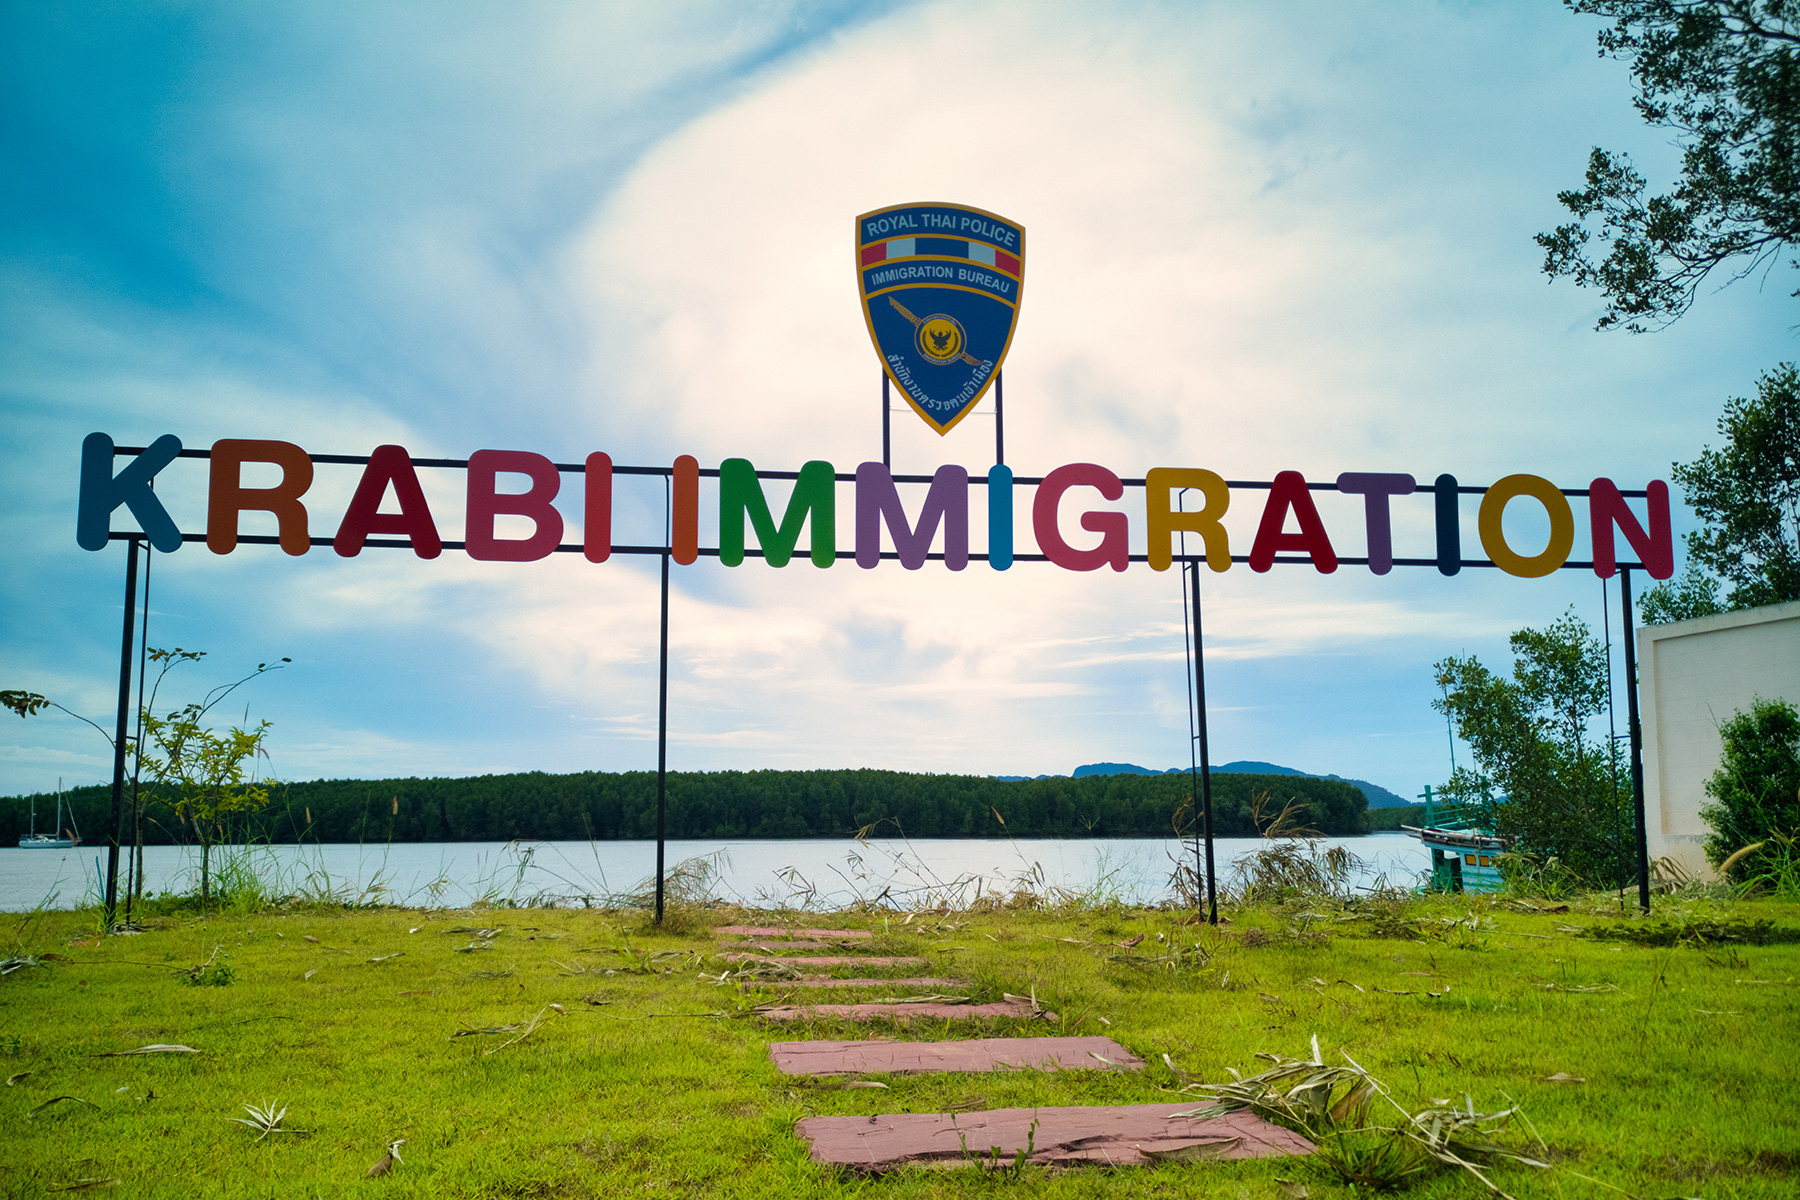 Colorful sign against a blue sky: Krabi Immigration